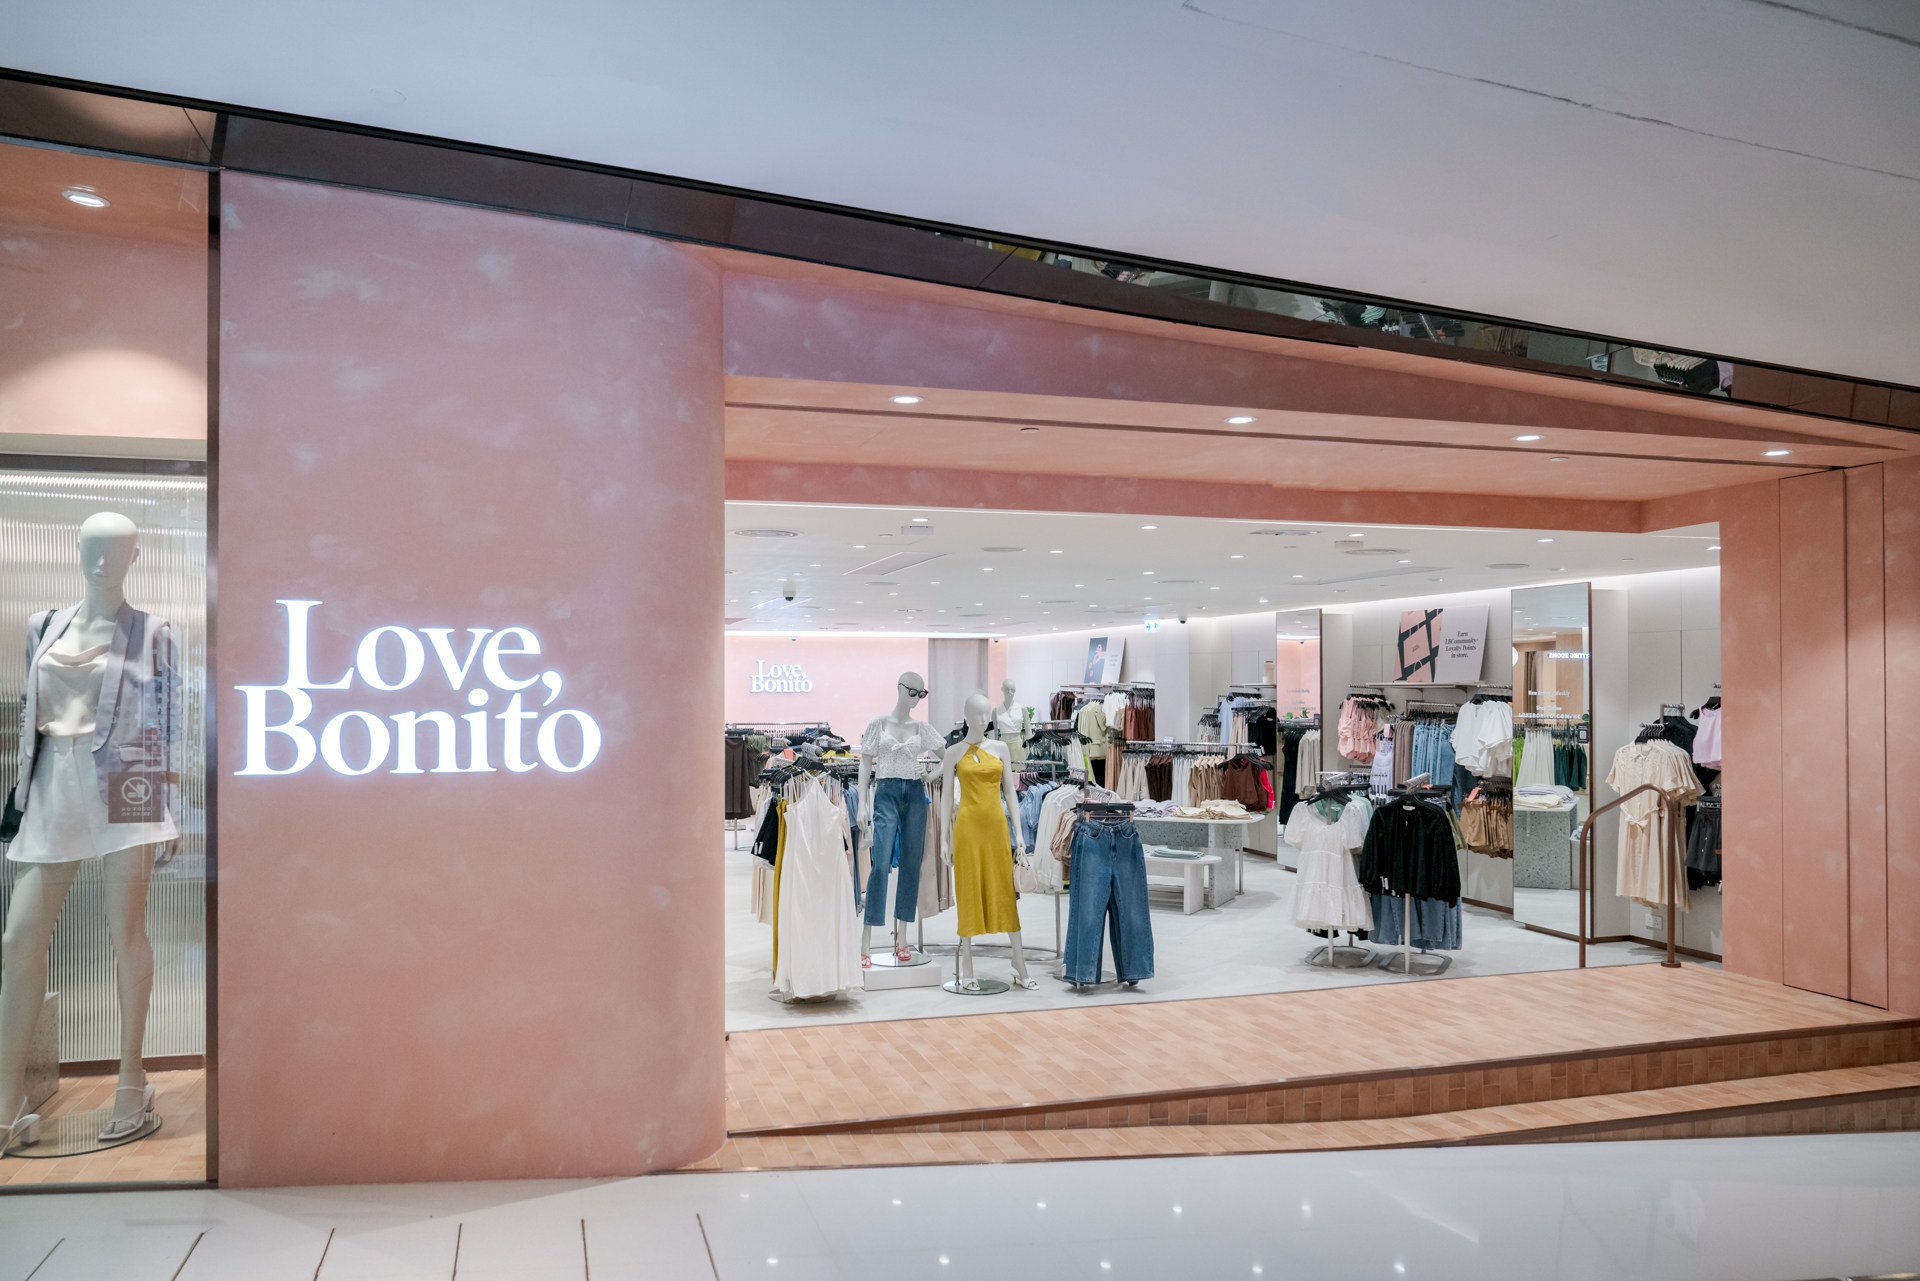 Shopping For The Best Of Experiences At Love, Bonito